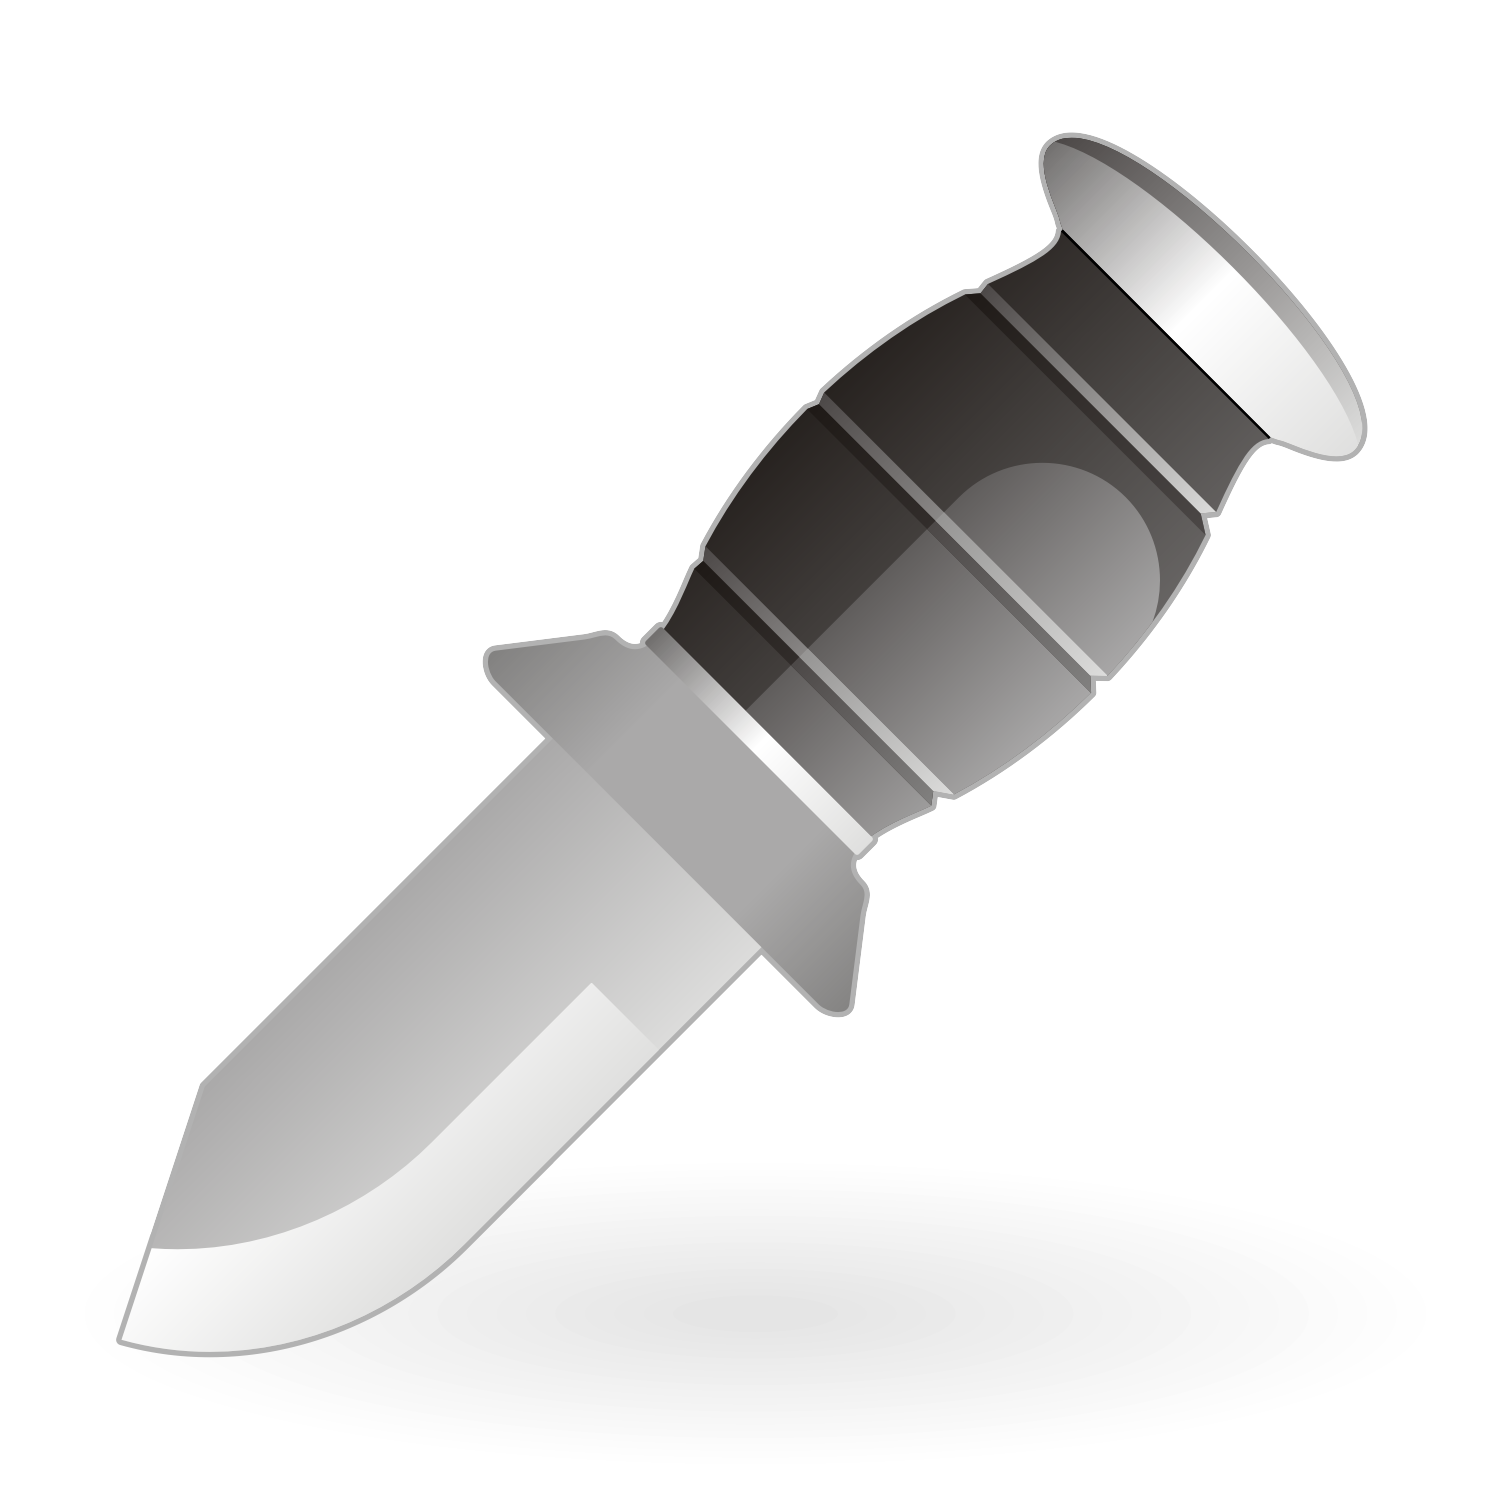 Download Vector for free use: Knife vector